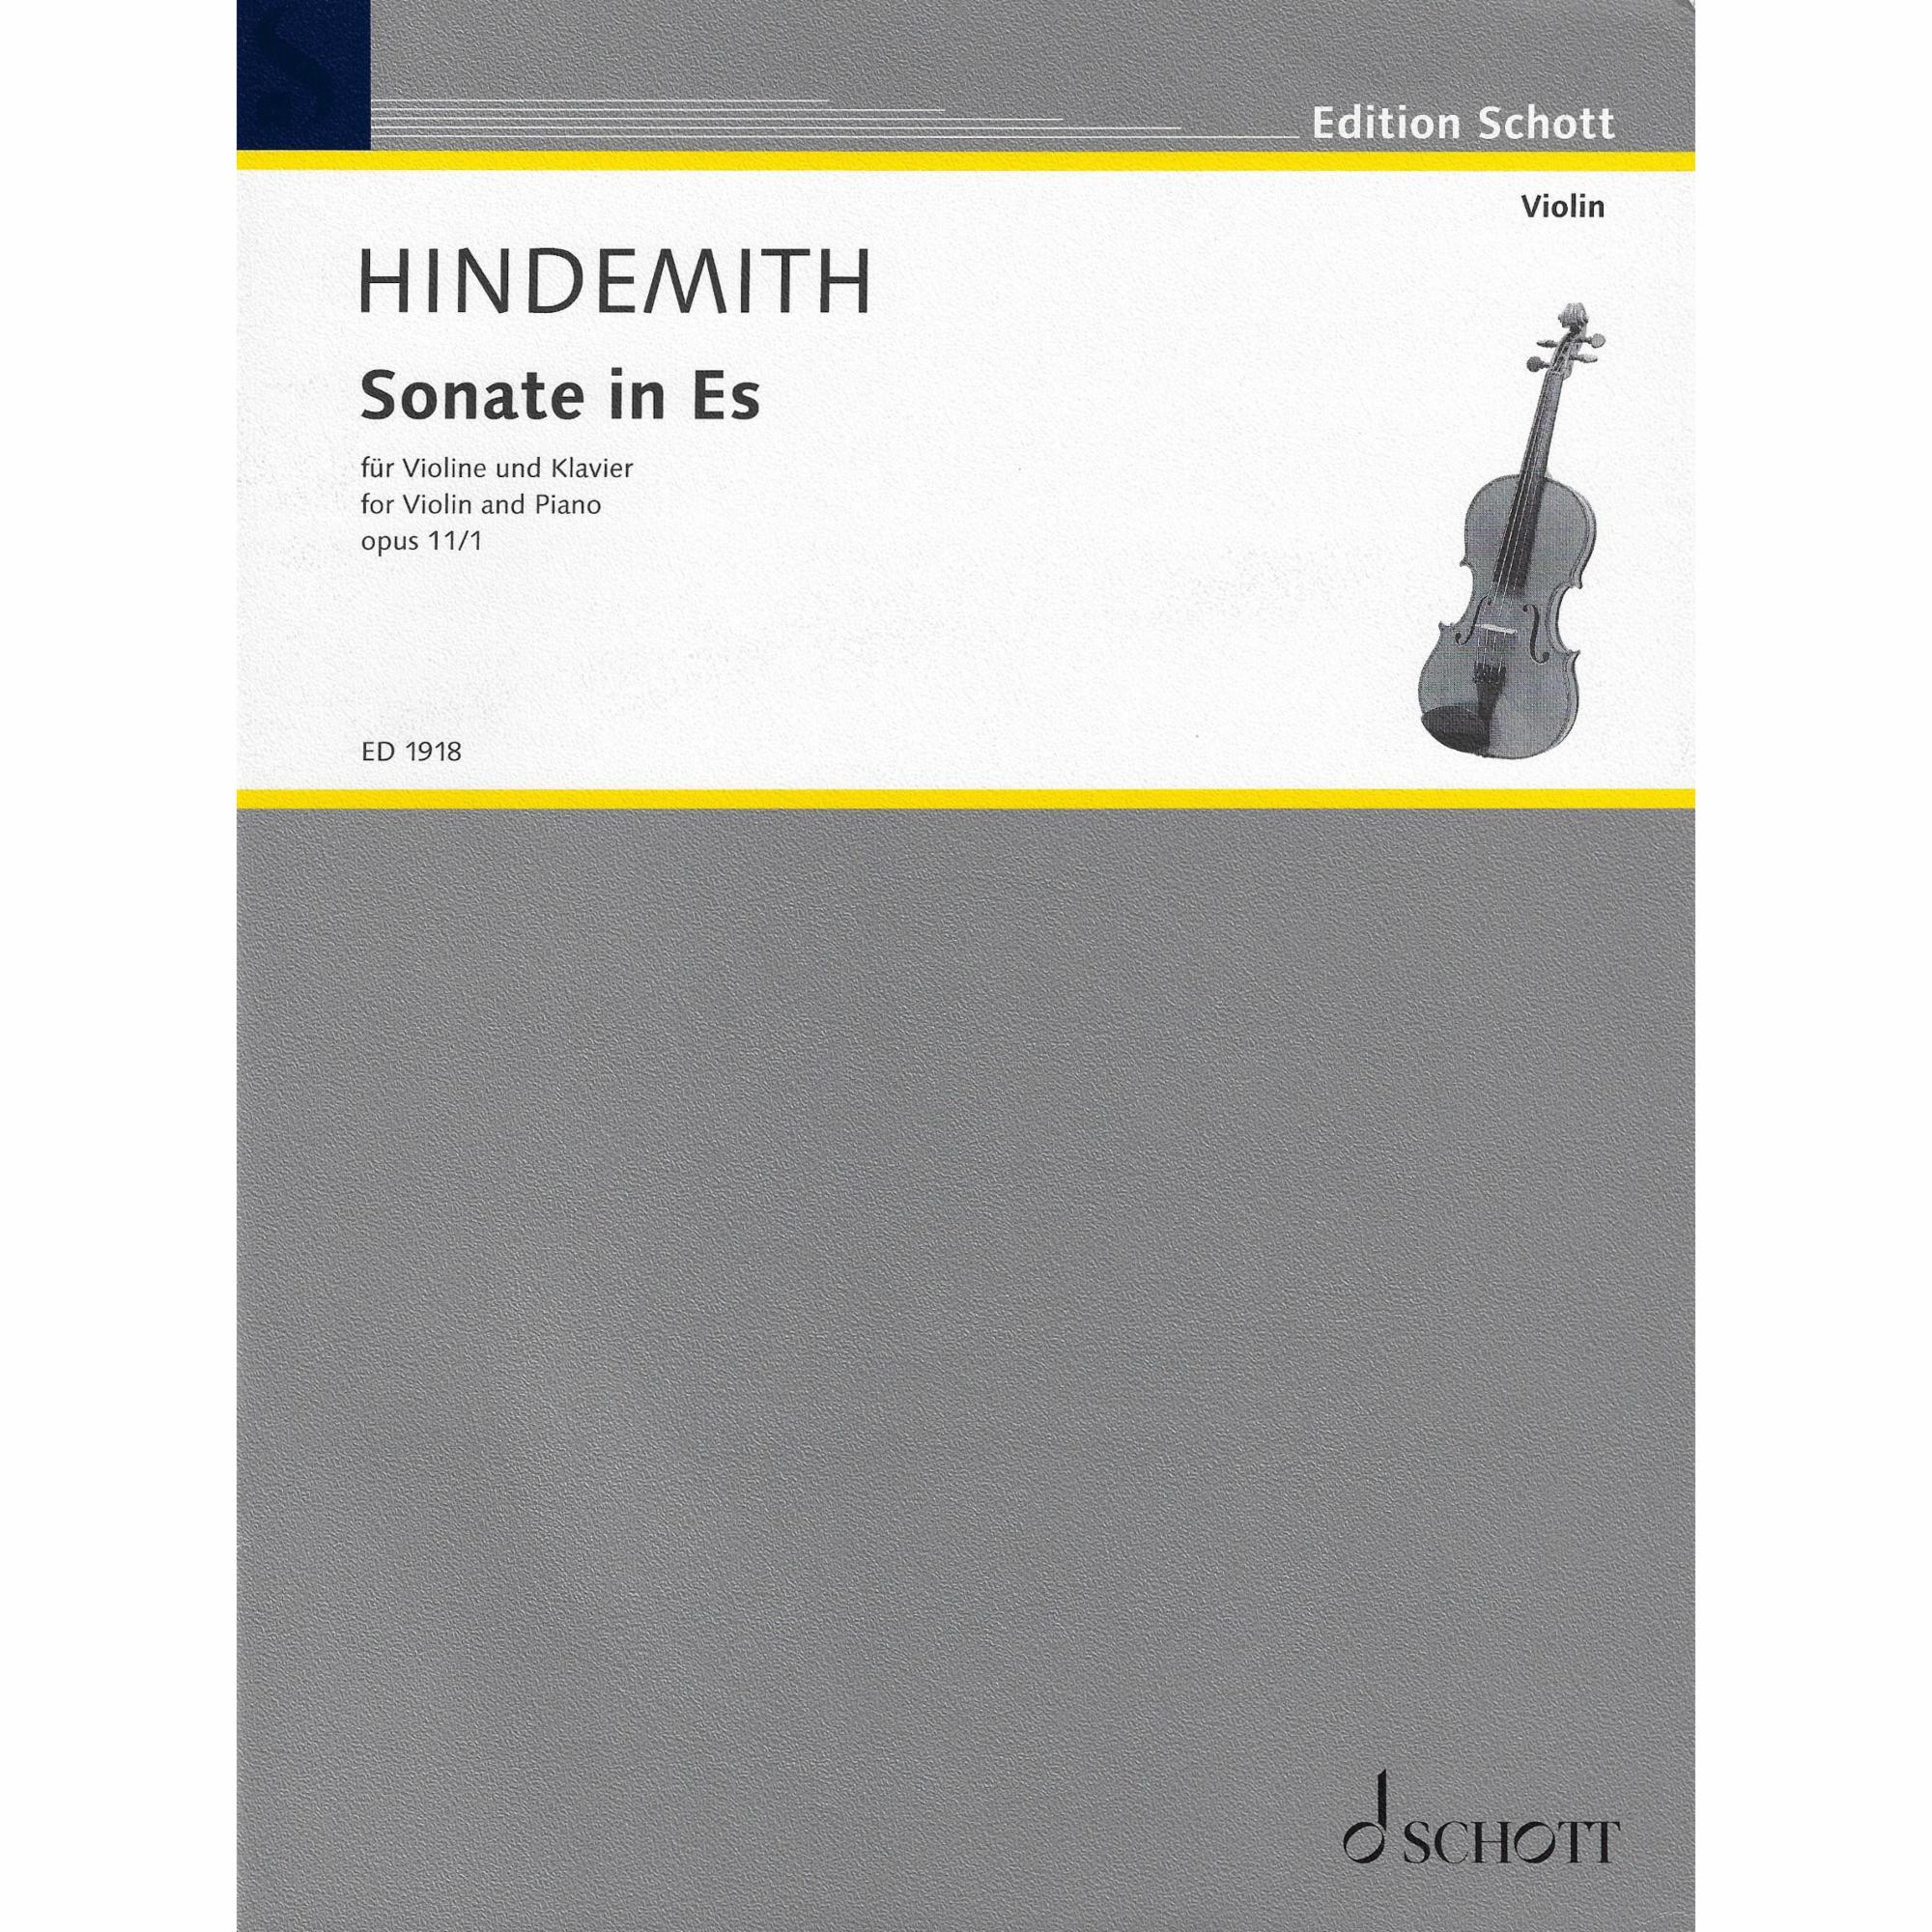 Hindemith -- Sonata in E-flat Major, Op. 11/1 for Violin and Piano